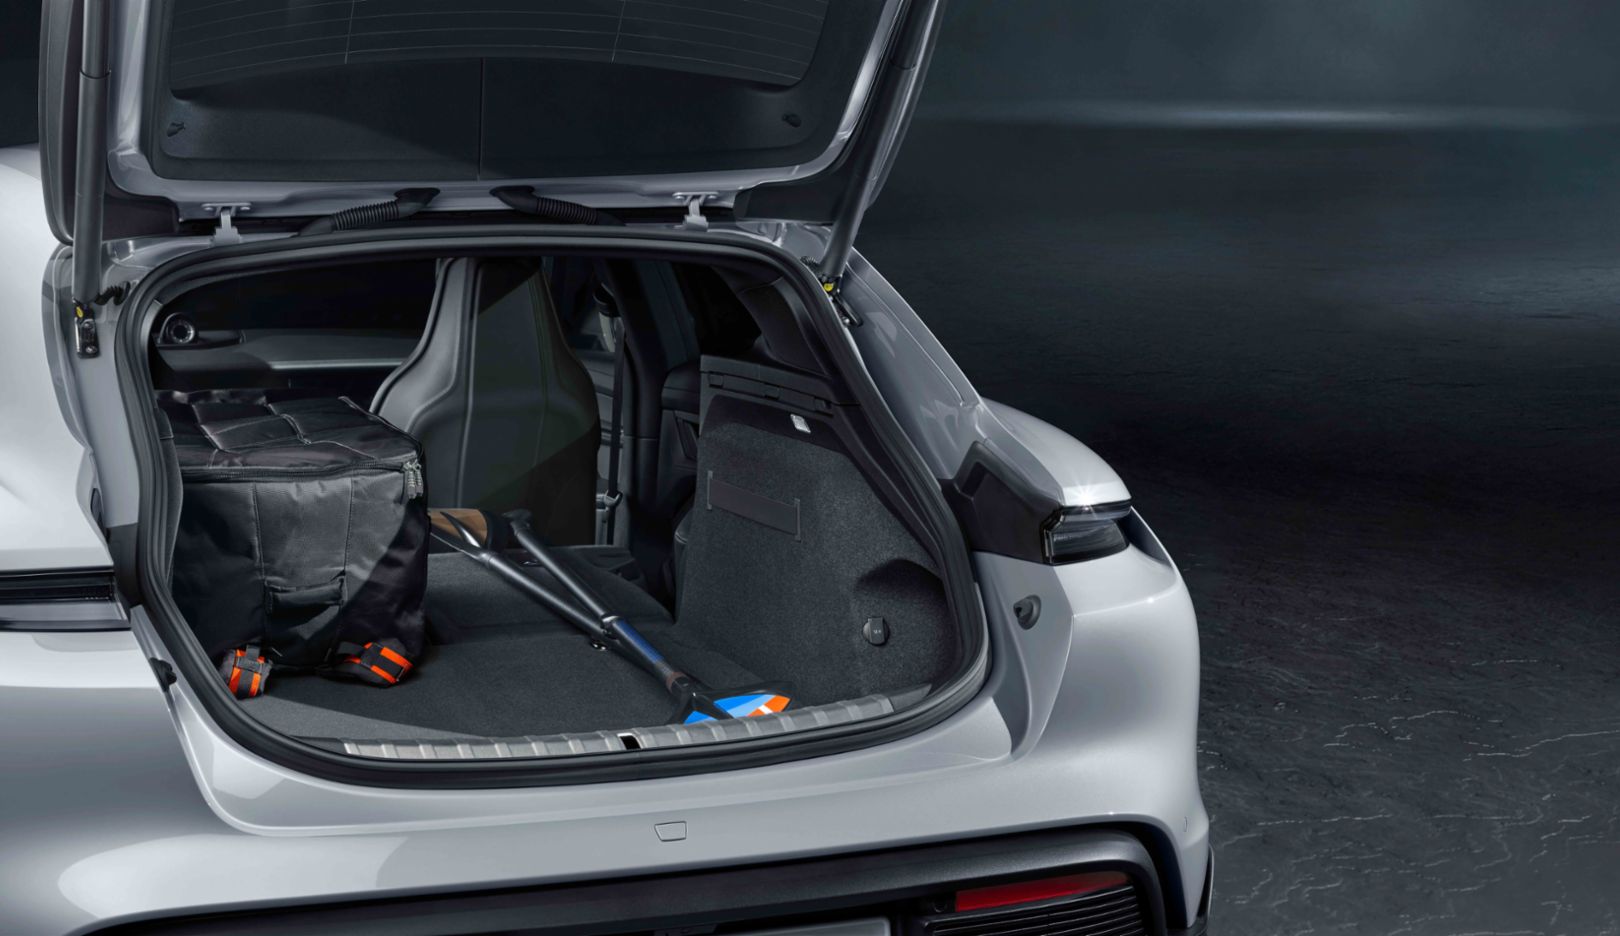 Room for more: The boot volume can be expanded to up to 1,200 litres when the seats are folded down.